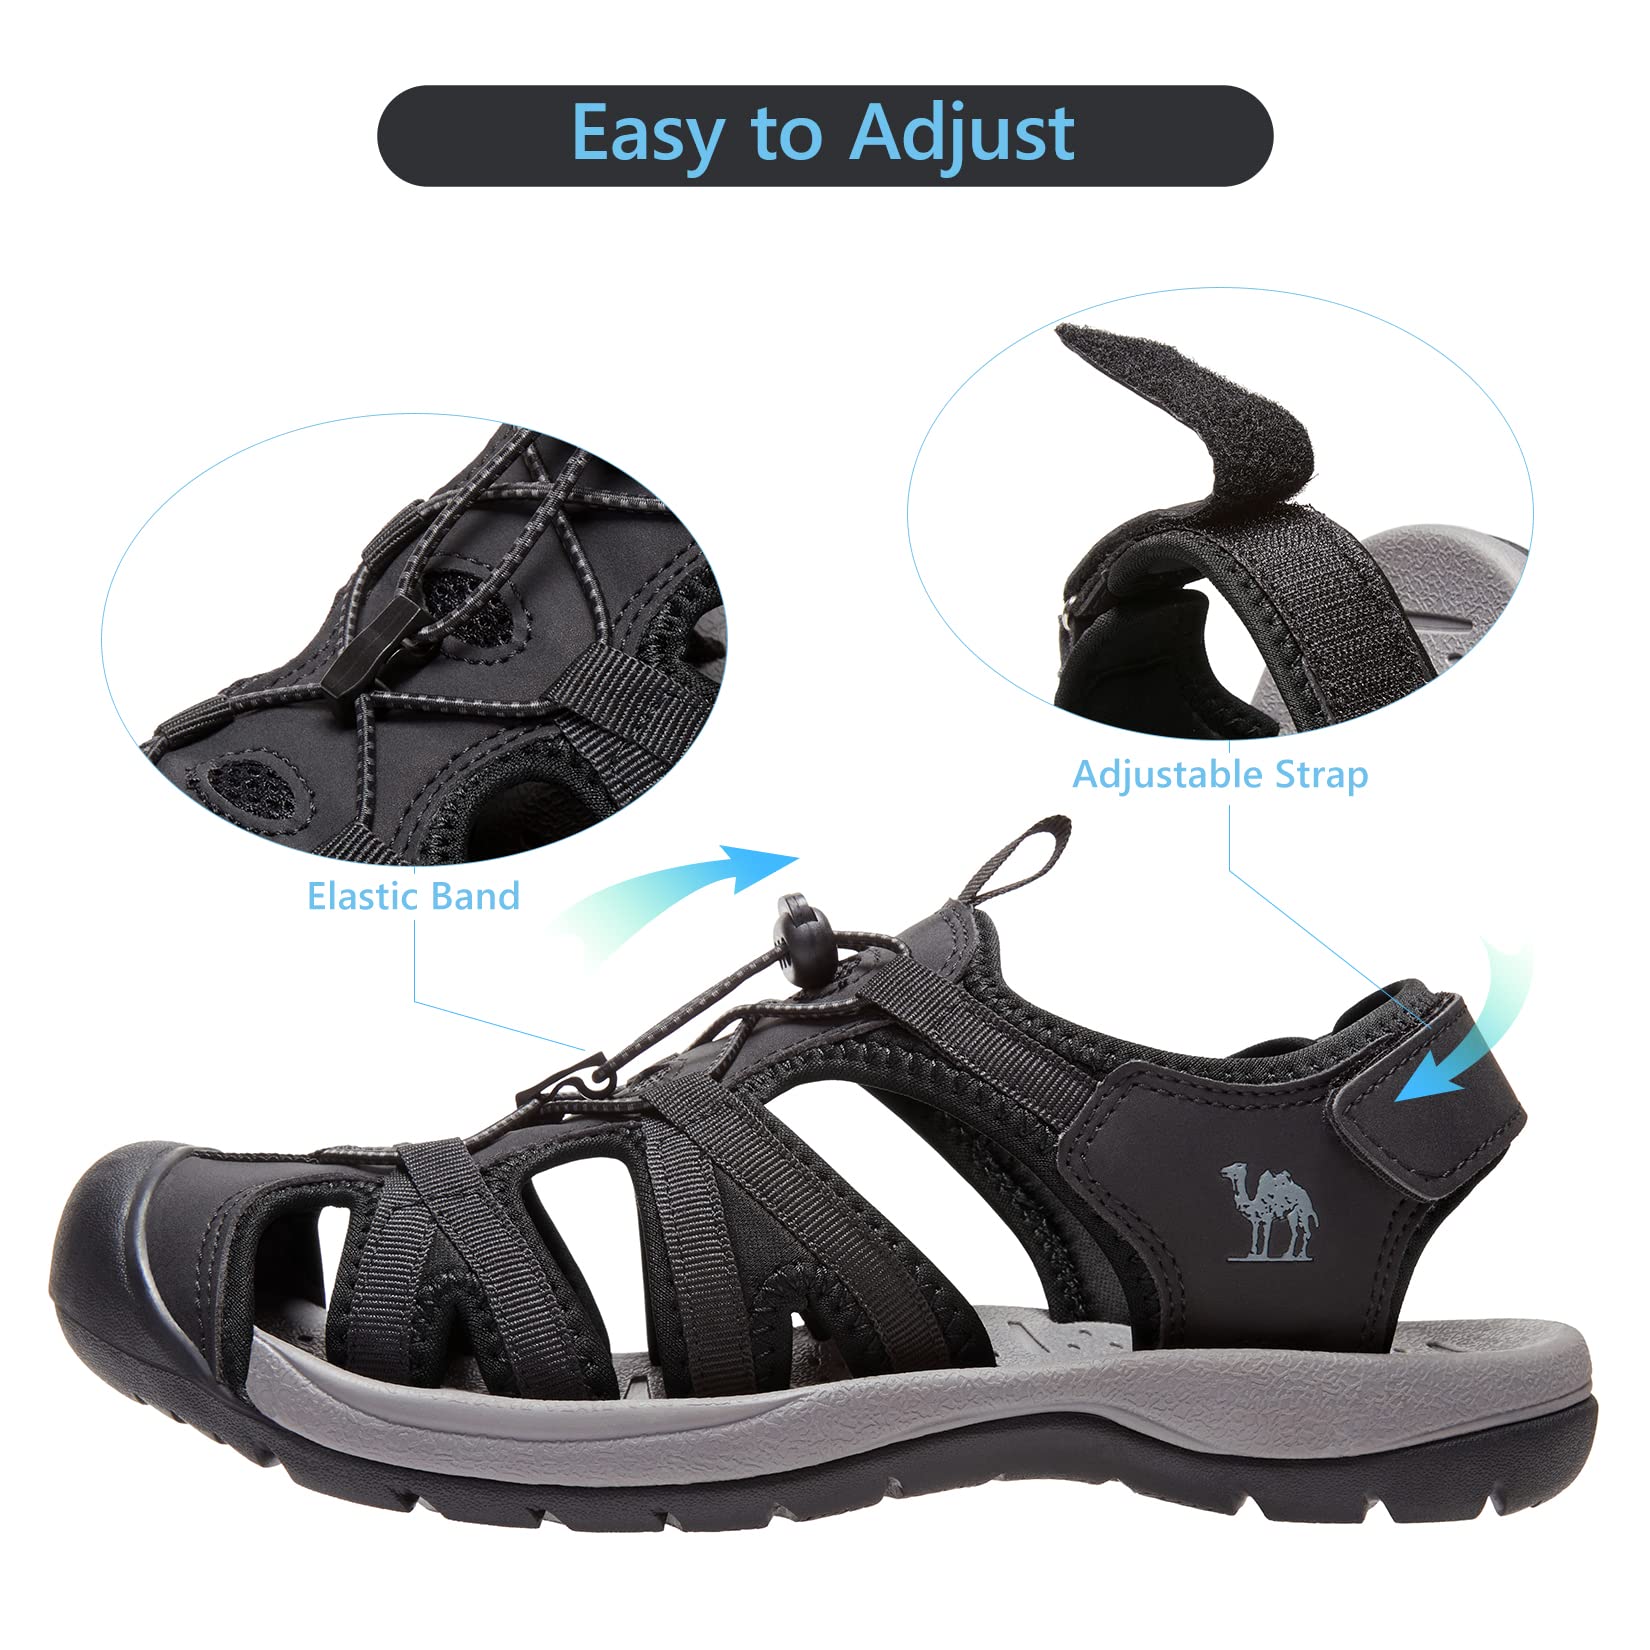 CAMELSPORTS Men's Hiking Sandals Closed Toe Outdoor Beach Sandal Waterproof Sport Fisherman Sandals Water Shoes